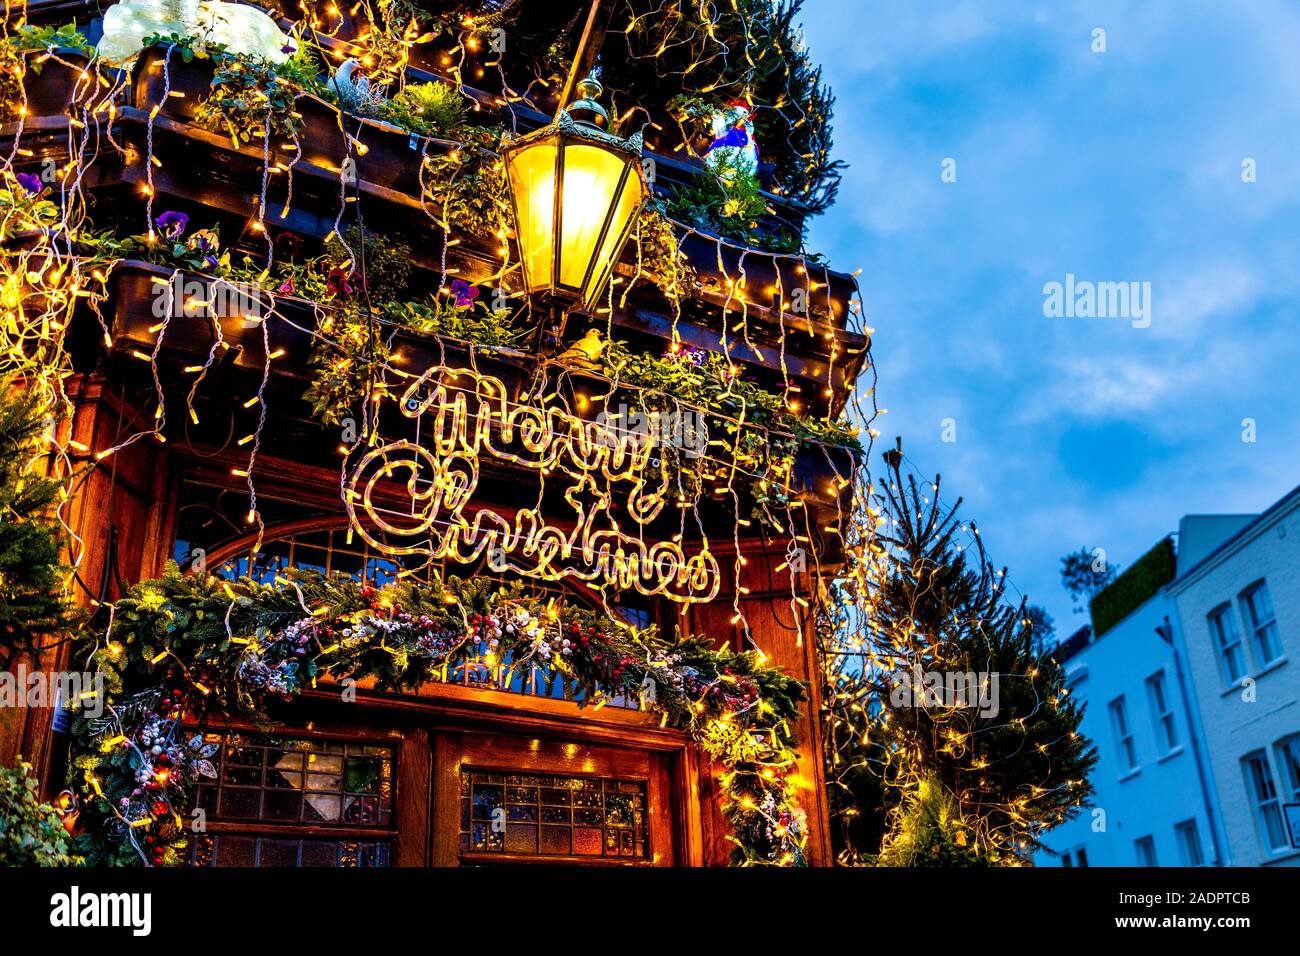 Merry Christmas and opulent Christmas lights and decorations on the facade of Churchill Arms Pub, London, UK Stock Photo